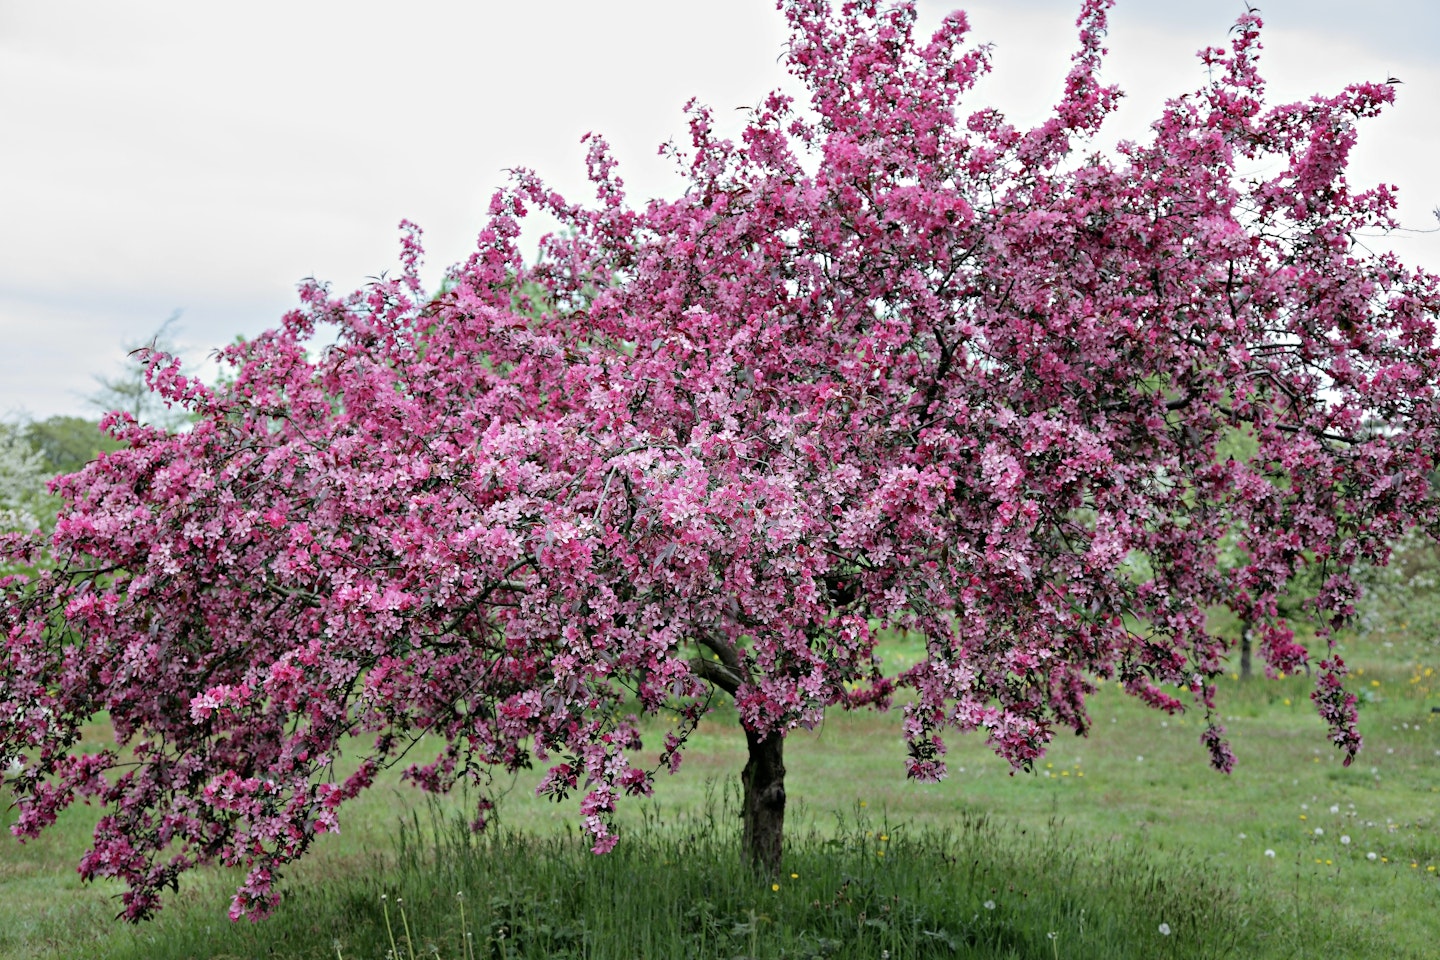 The ornamental crab apple tree is overlooked, yet offers many benefits